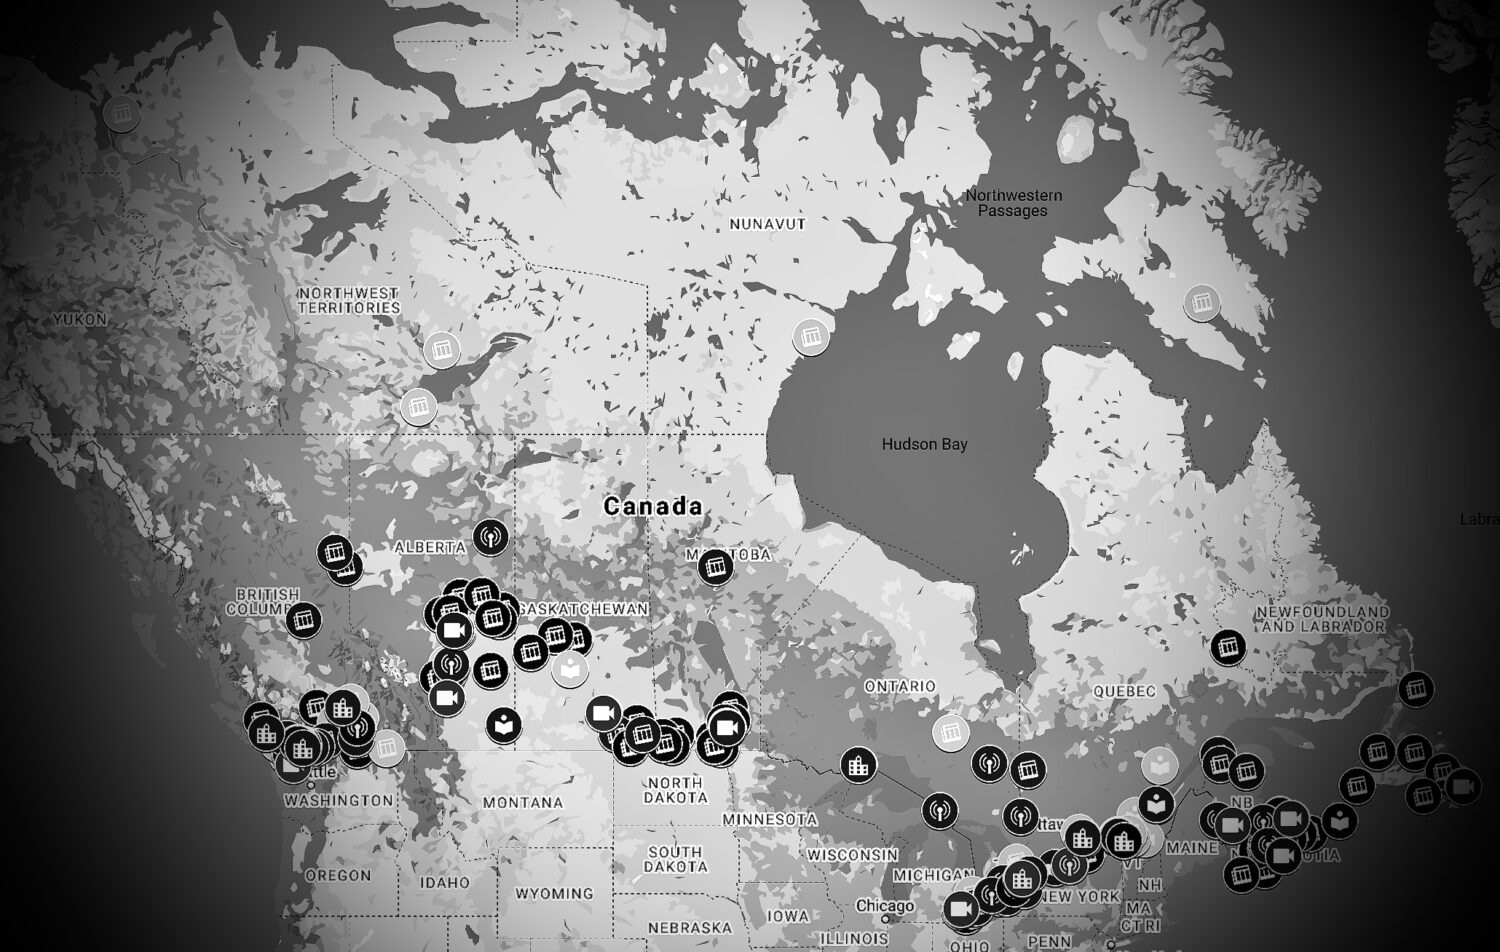 Black and white COVID-19 Media Impact Map for Canada in Google Maps showing 286 markers.